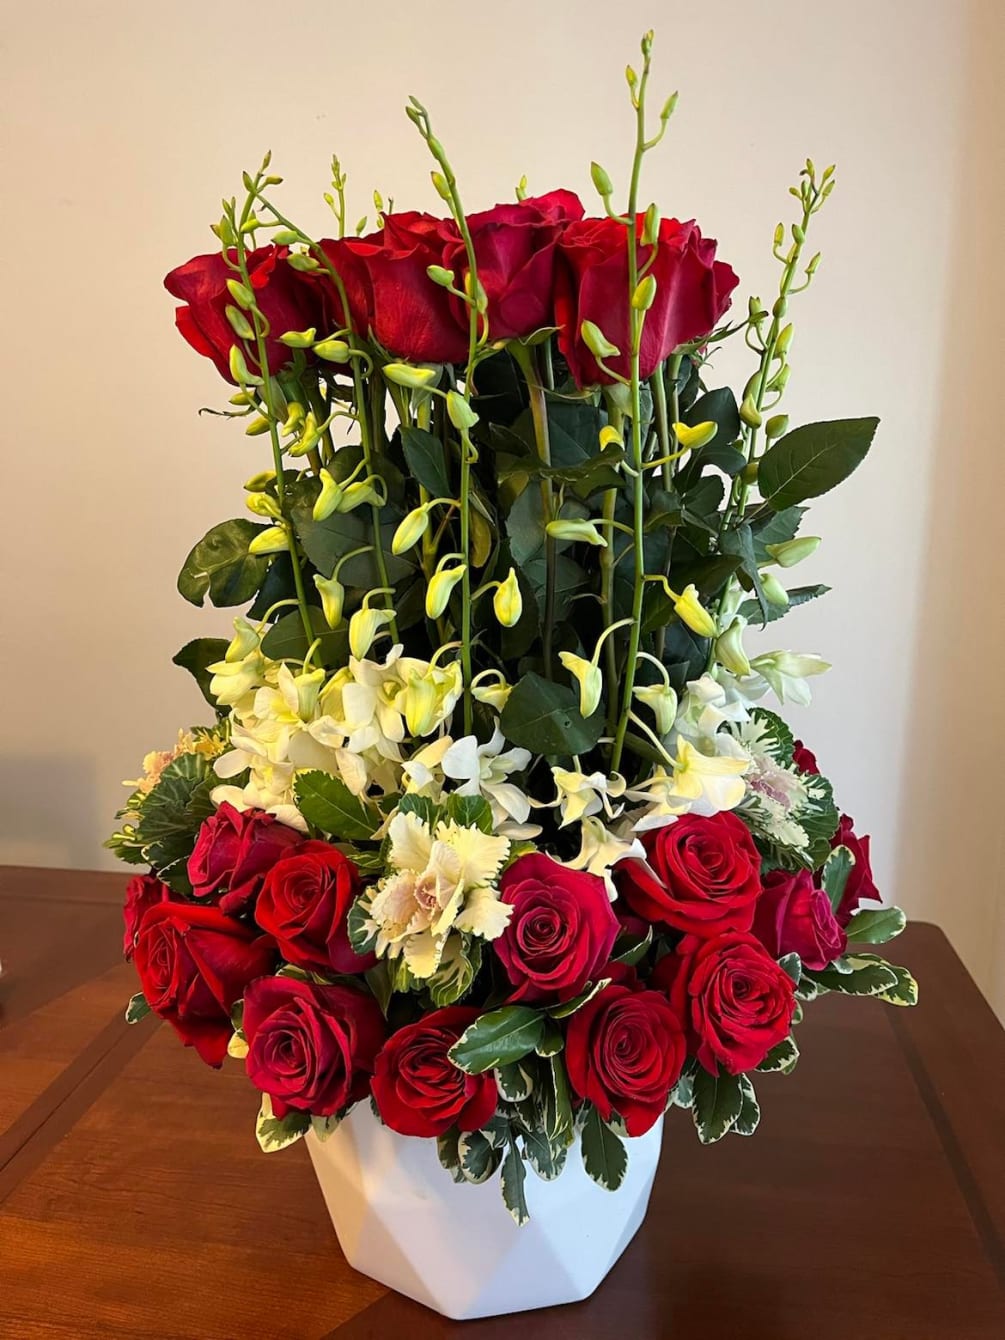 This arrangement includes red and hot pink roses, dendrobium orchids, Cabbages